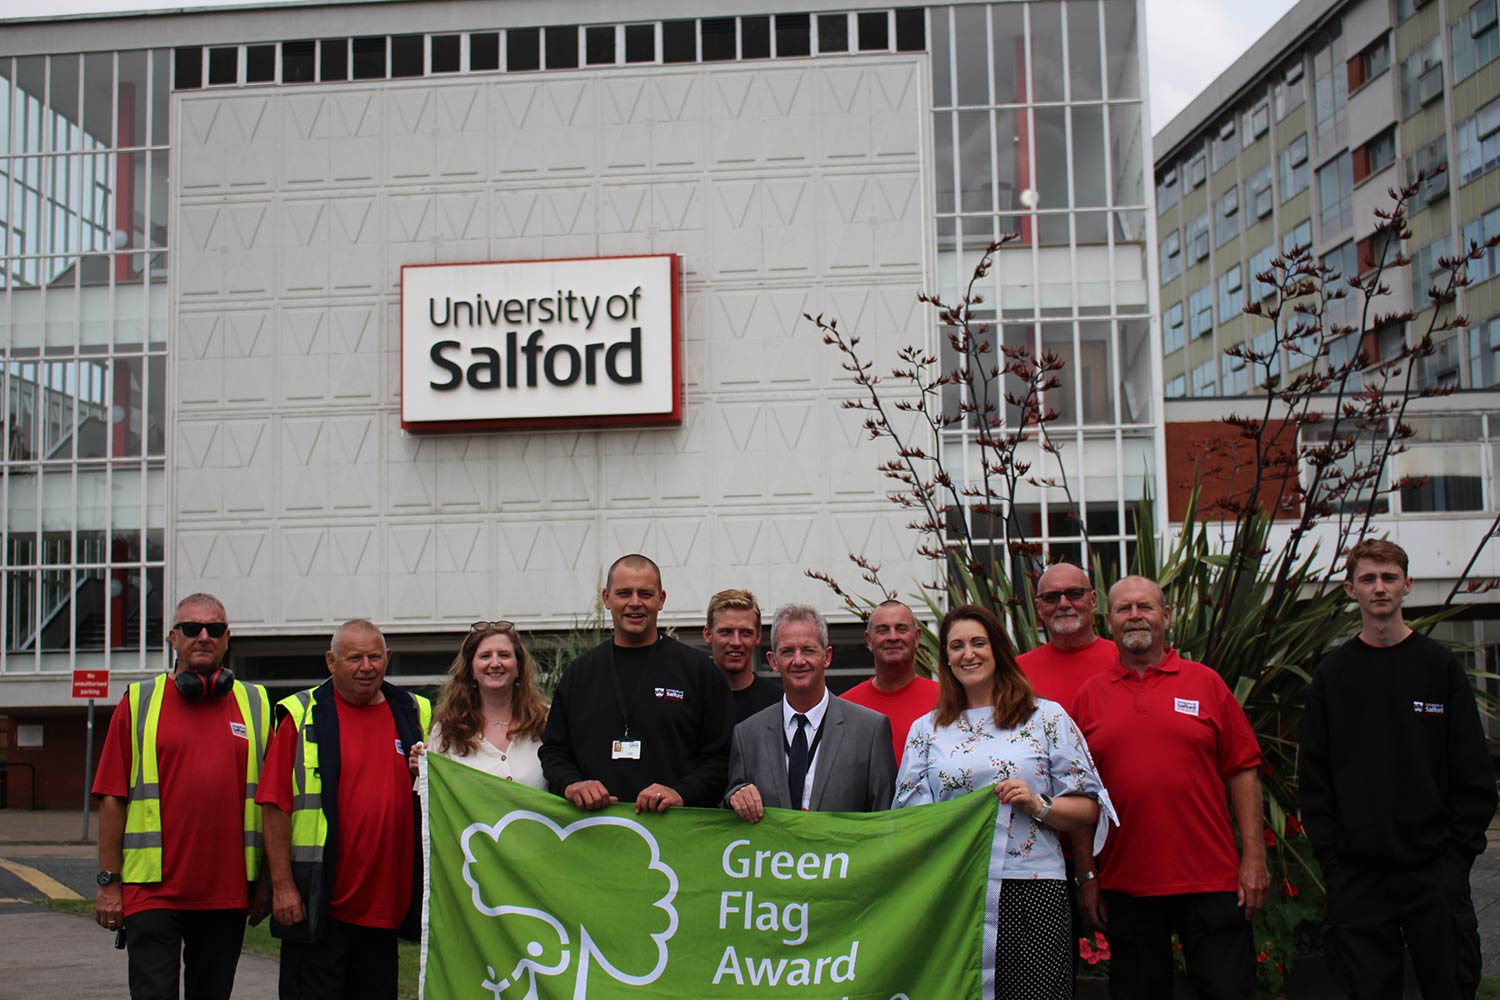 Estates and facilities staff stood with green flag